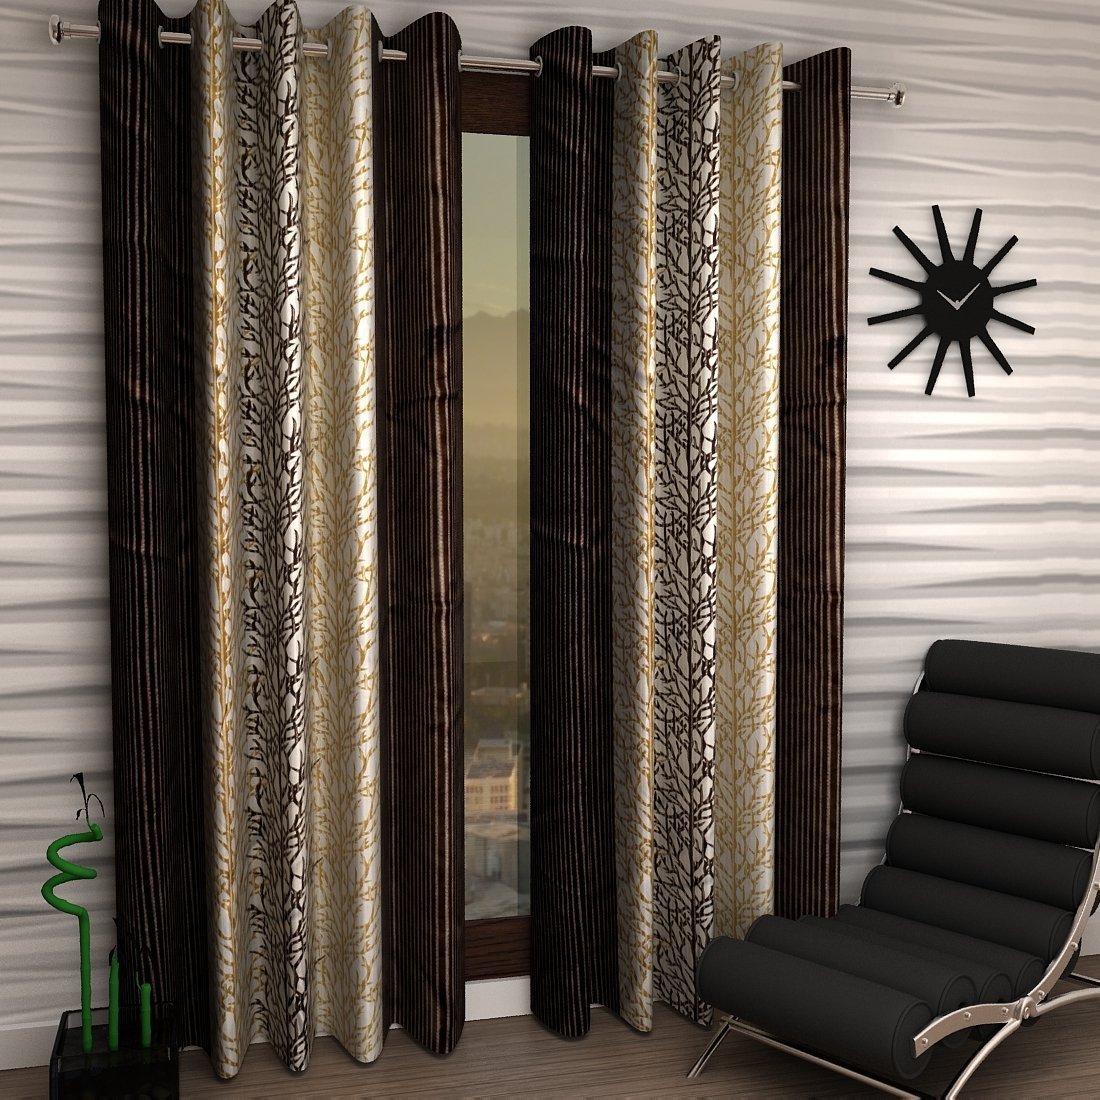 Amazon: Home Sizzler Eyelet Polyester Window Curtain (5Ft, Brown) at Rs 167